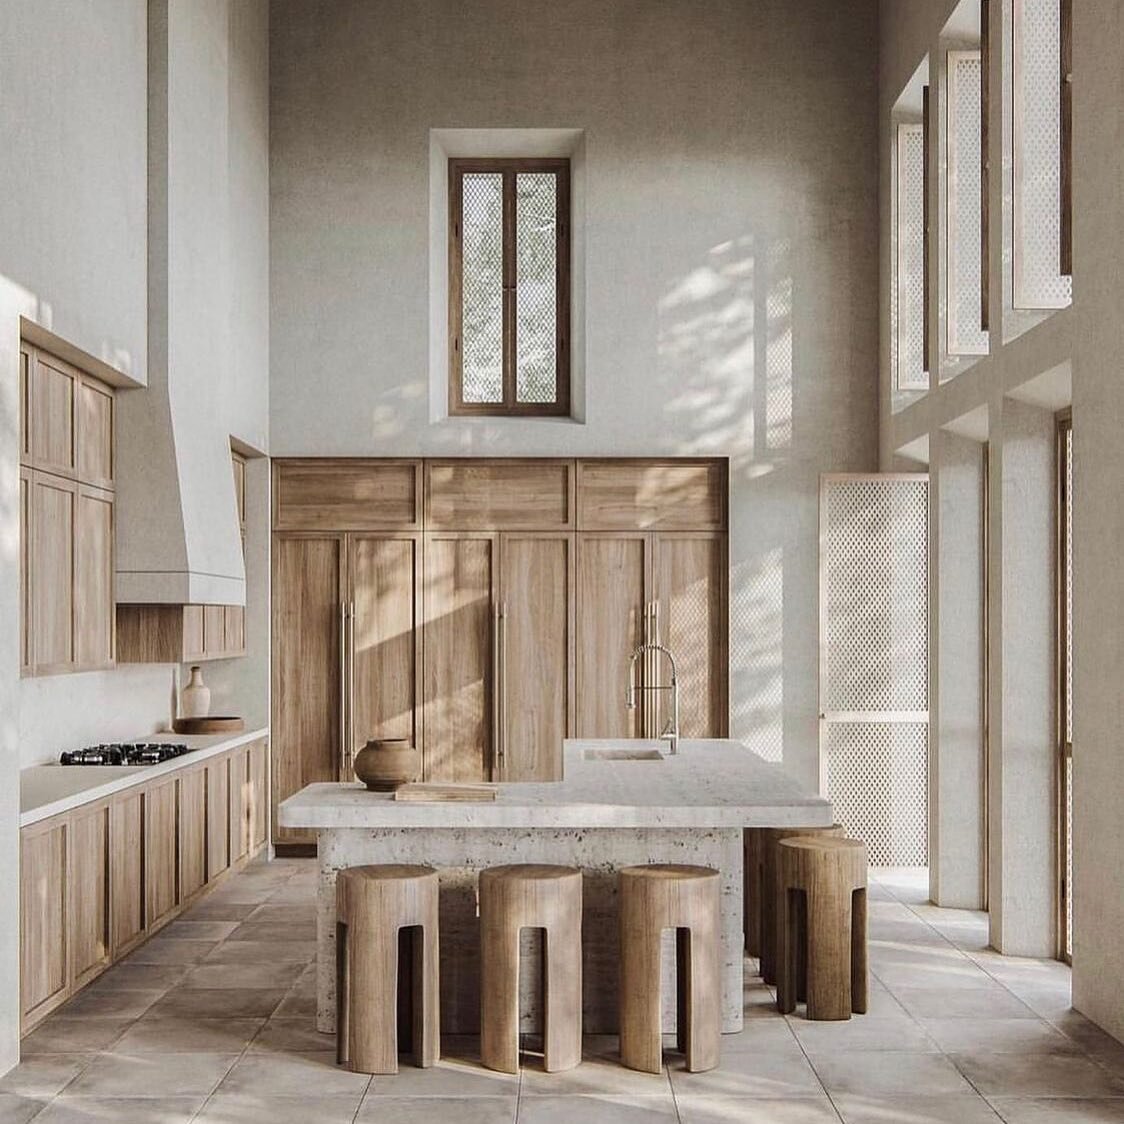 PERFECTION&hellip;..that about sums up the kitchen by @noasantos for his project Country Road. #terracotta #travertine